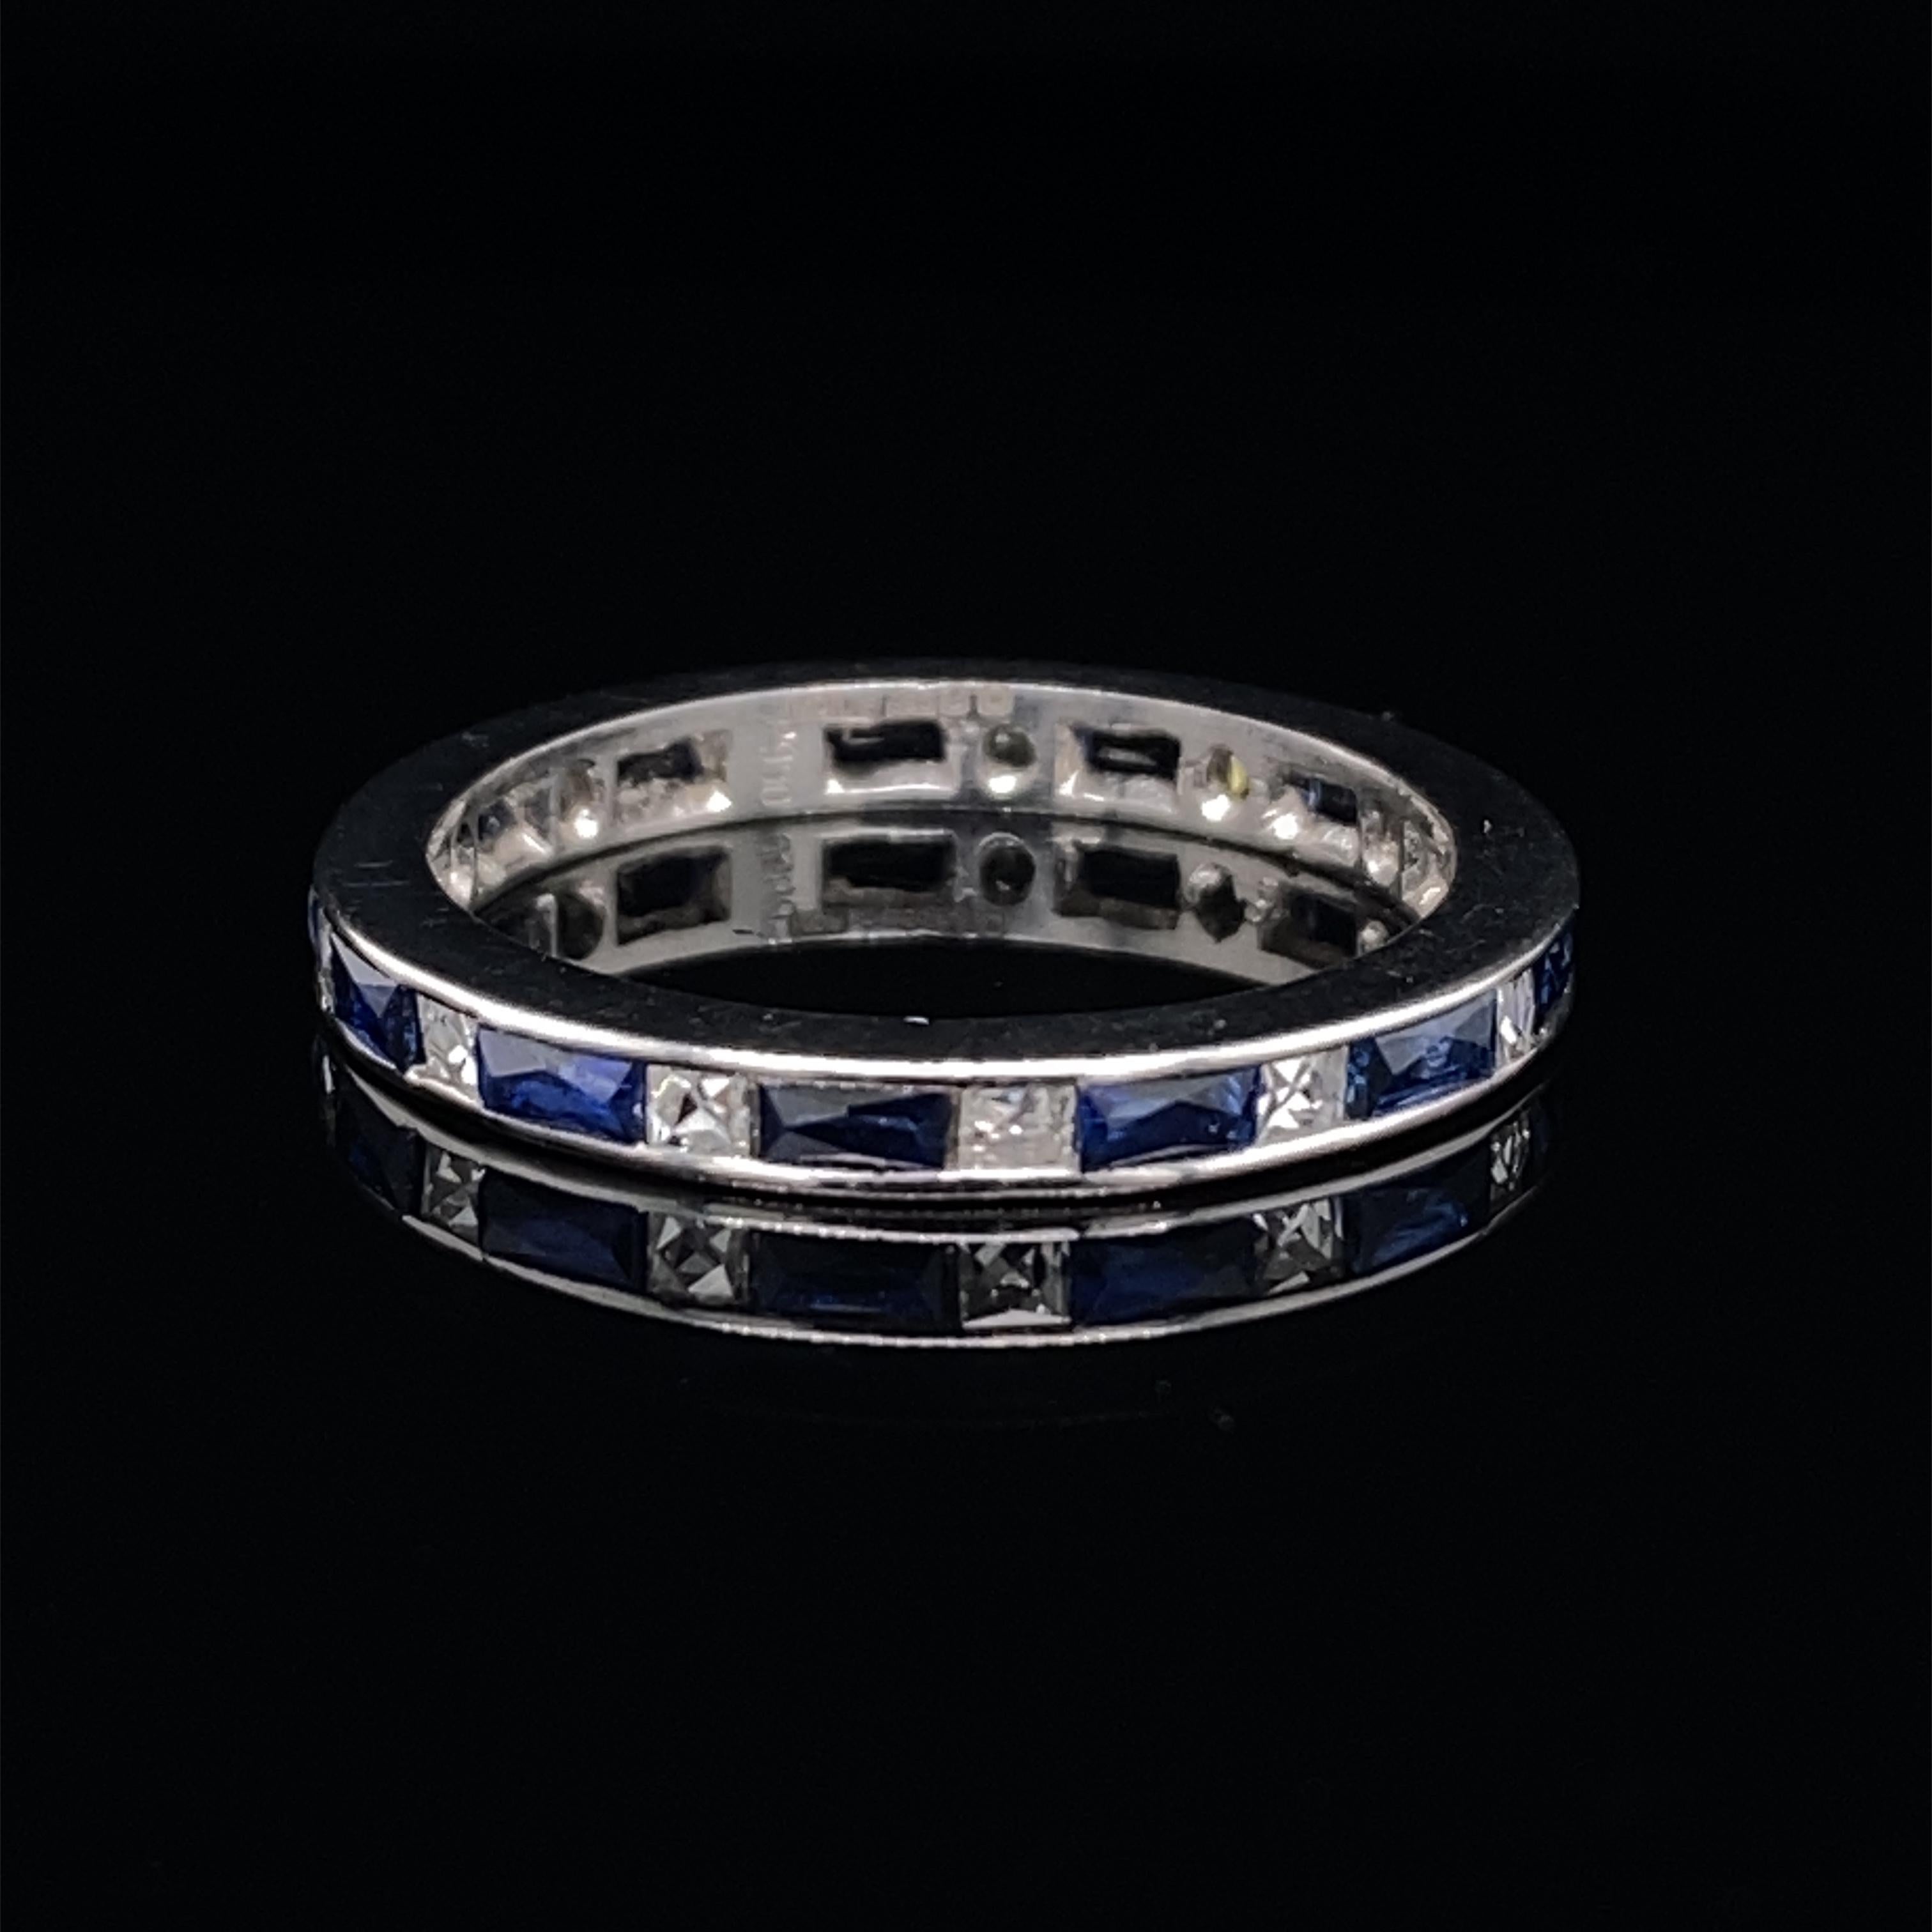 A sapphire and diamond full eternity ring in platinum.

A beautiful full eternity band, set with a single row of alternating French cut diamonds and baguette cut sapphires, the diamonds are of high colour and clarity, assessed by ourselves as G